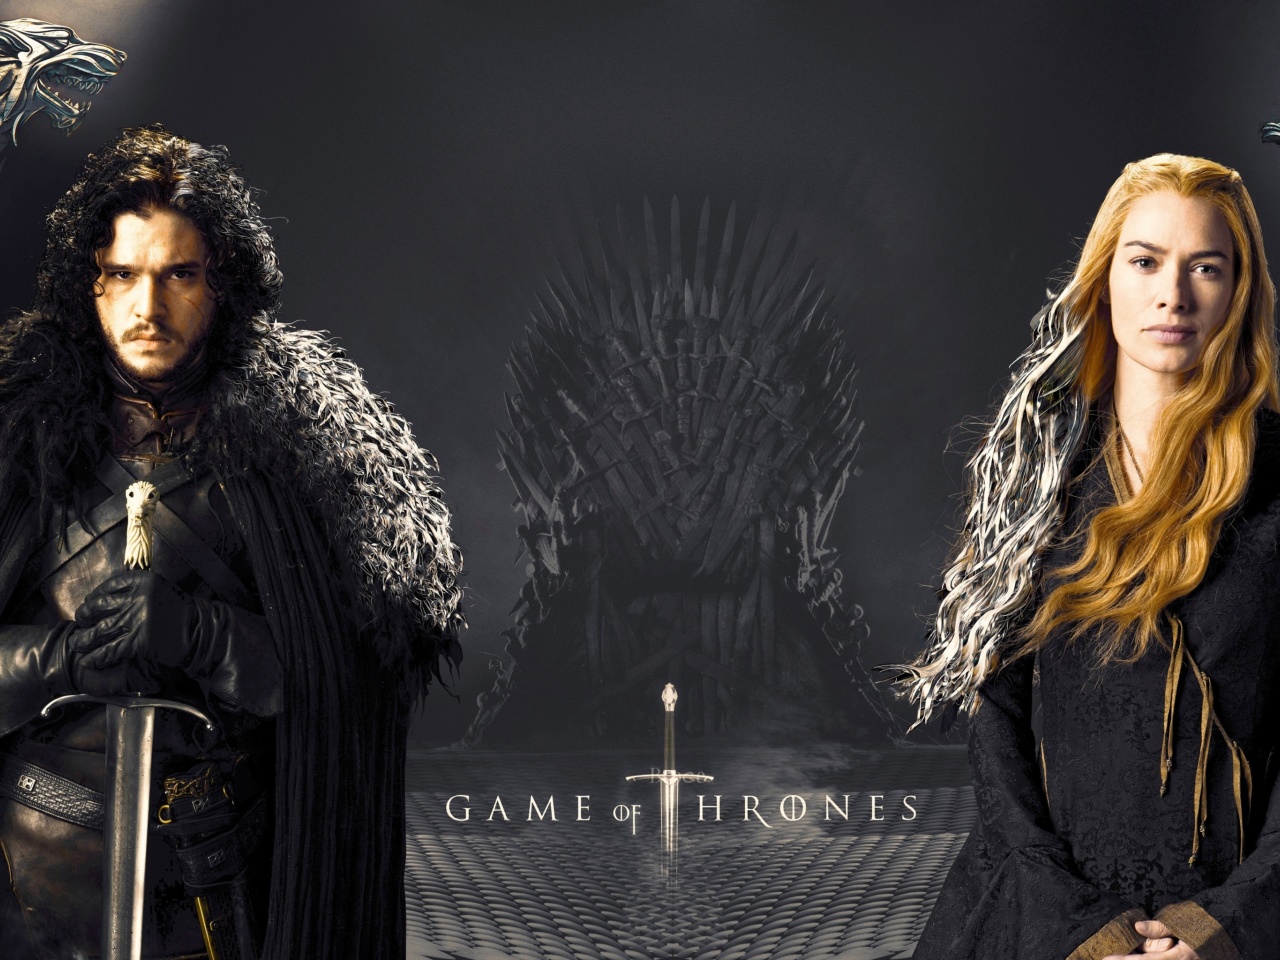 Game Of Thrones actors Jon Snow and Cersei Lannister screenshot #1 1280x960